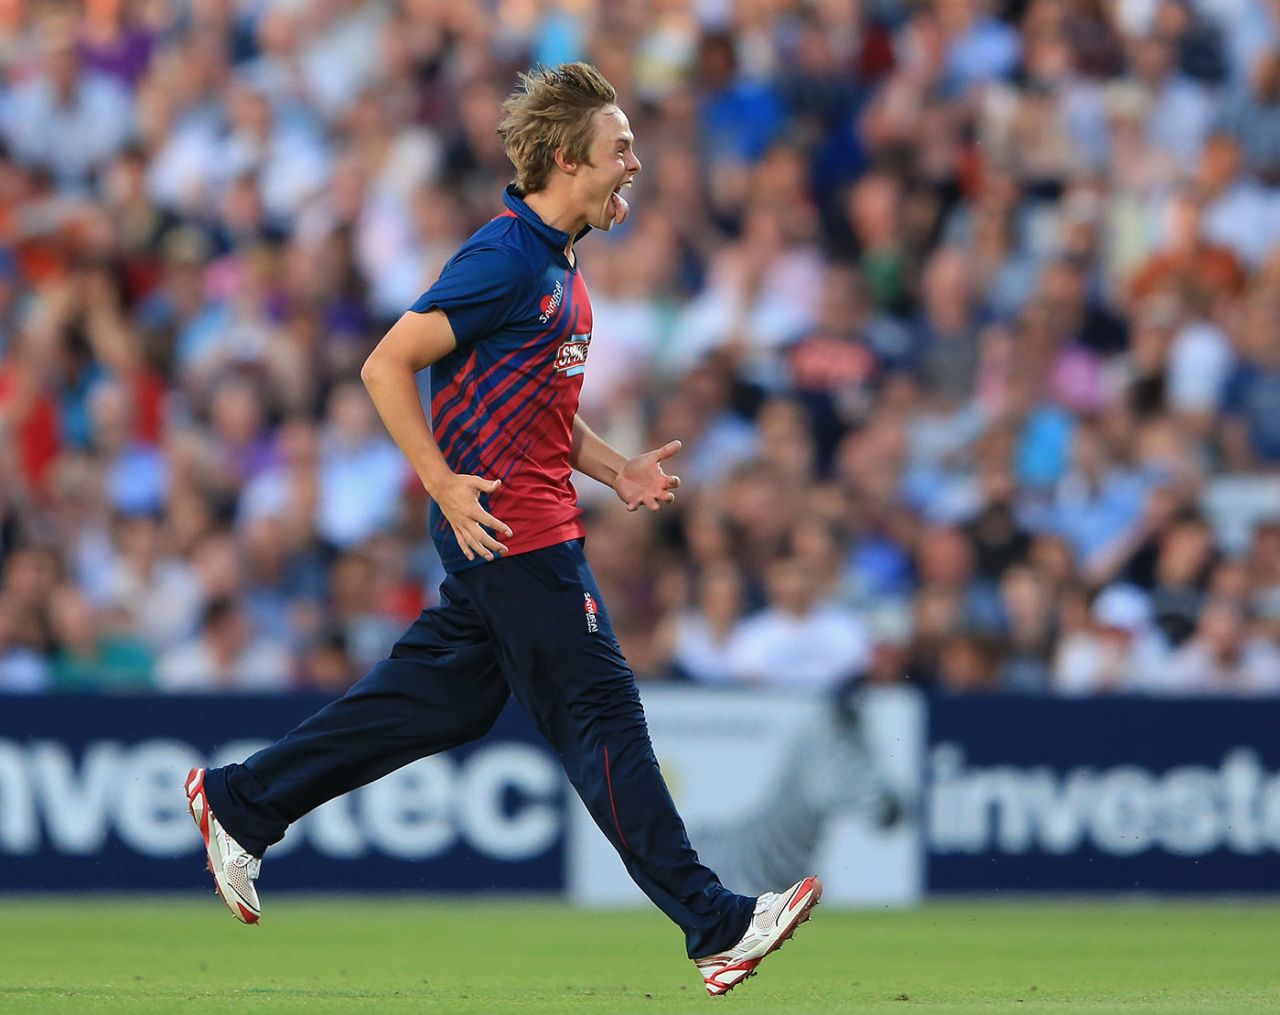 Fabian Cowdrey celebrates the wicket of Kevin O'Brien, Surrey v Kent, FLt20 South Group, The Oval, July 26, 2013

